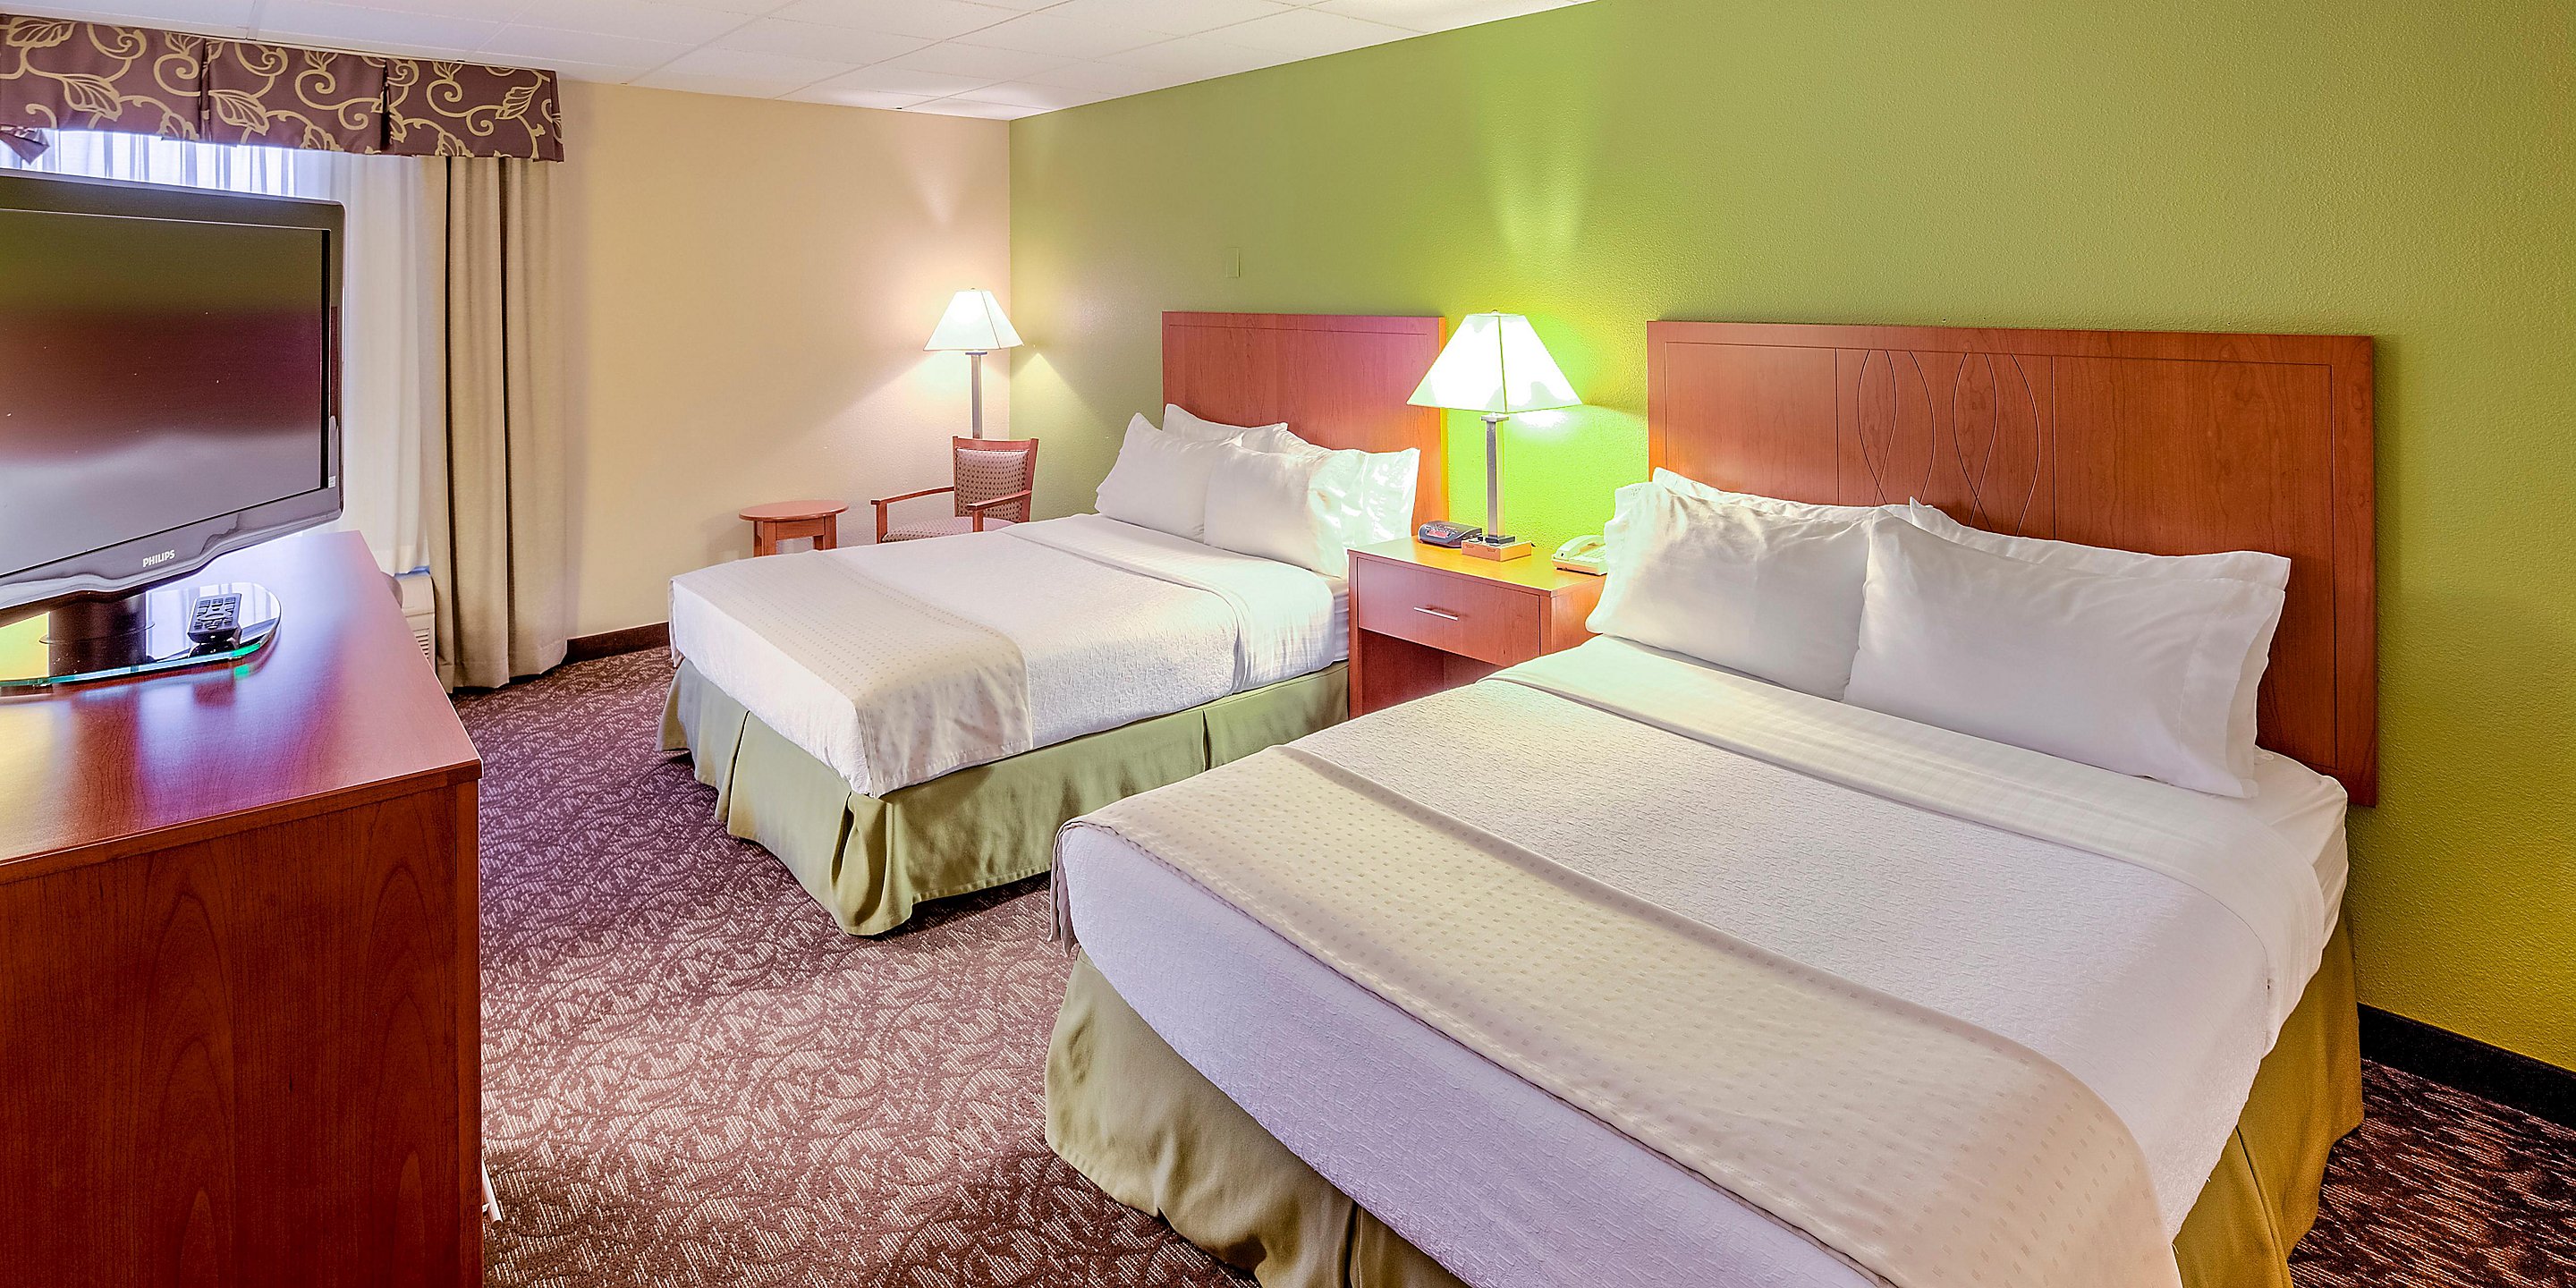 holiday-inn-hotel-and-suites-mansfield-3851026030-2x1.